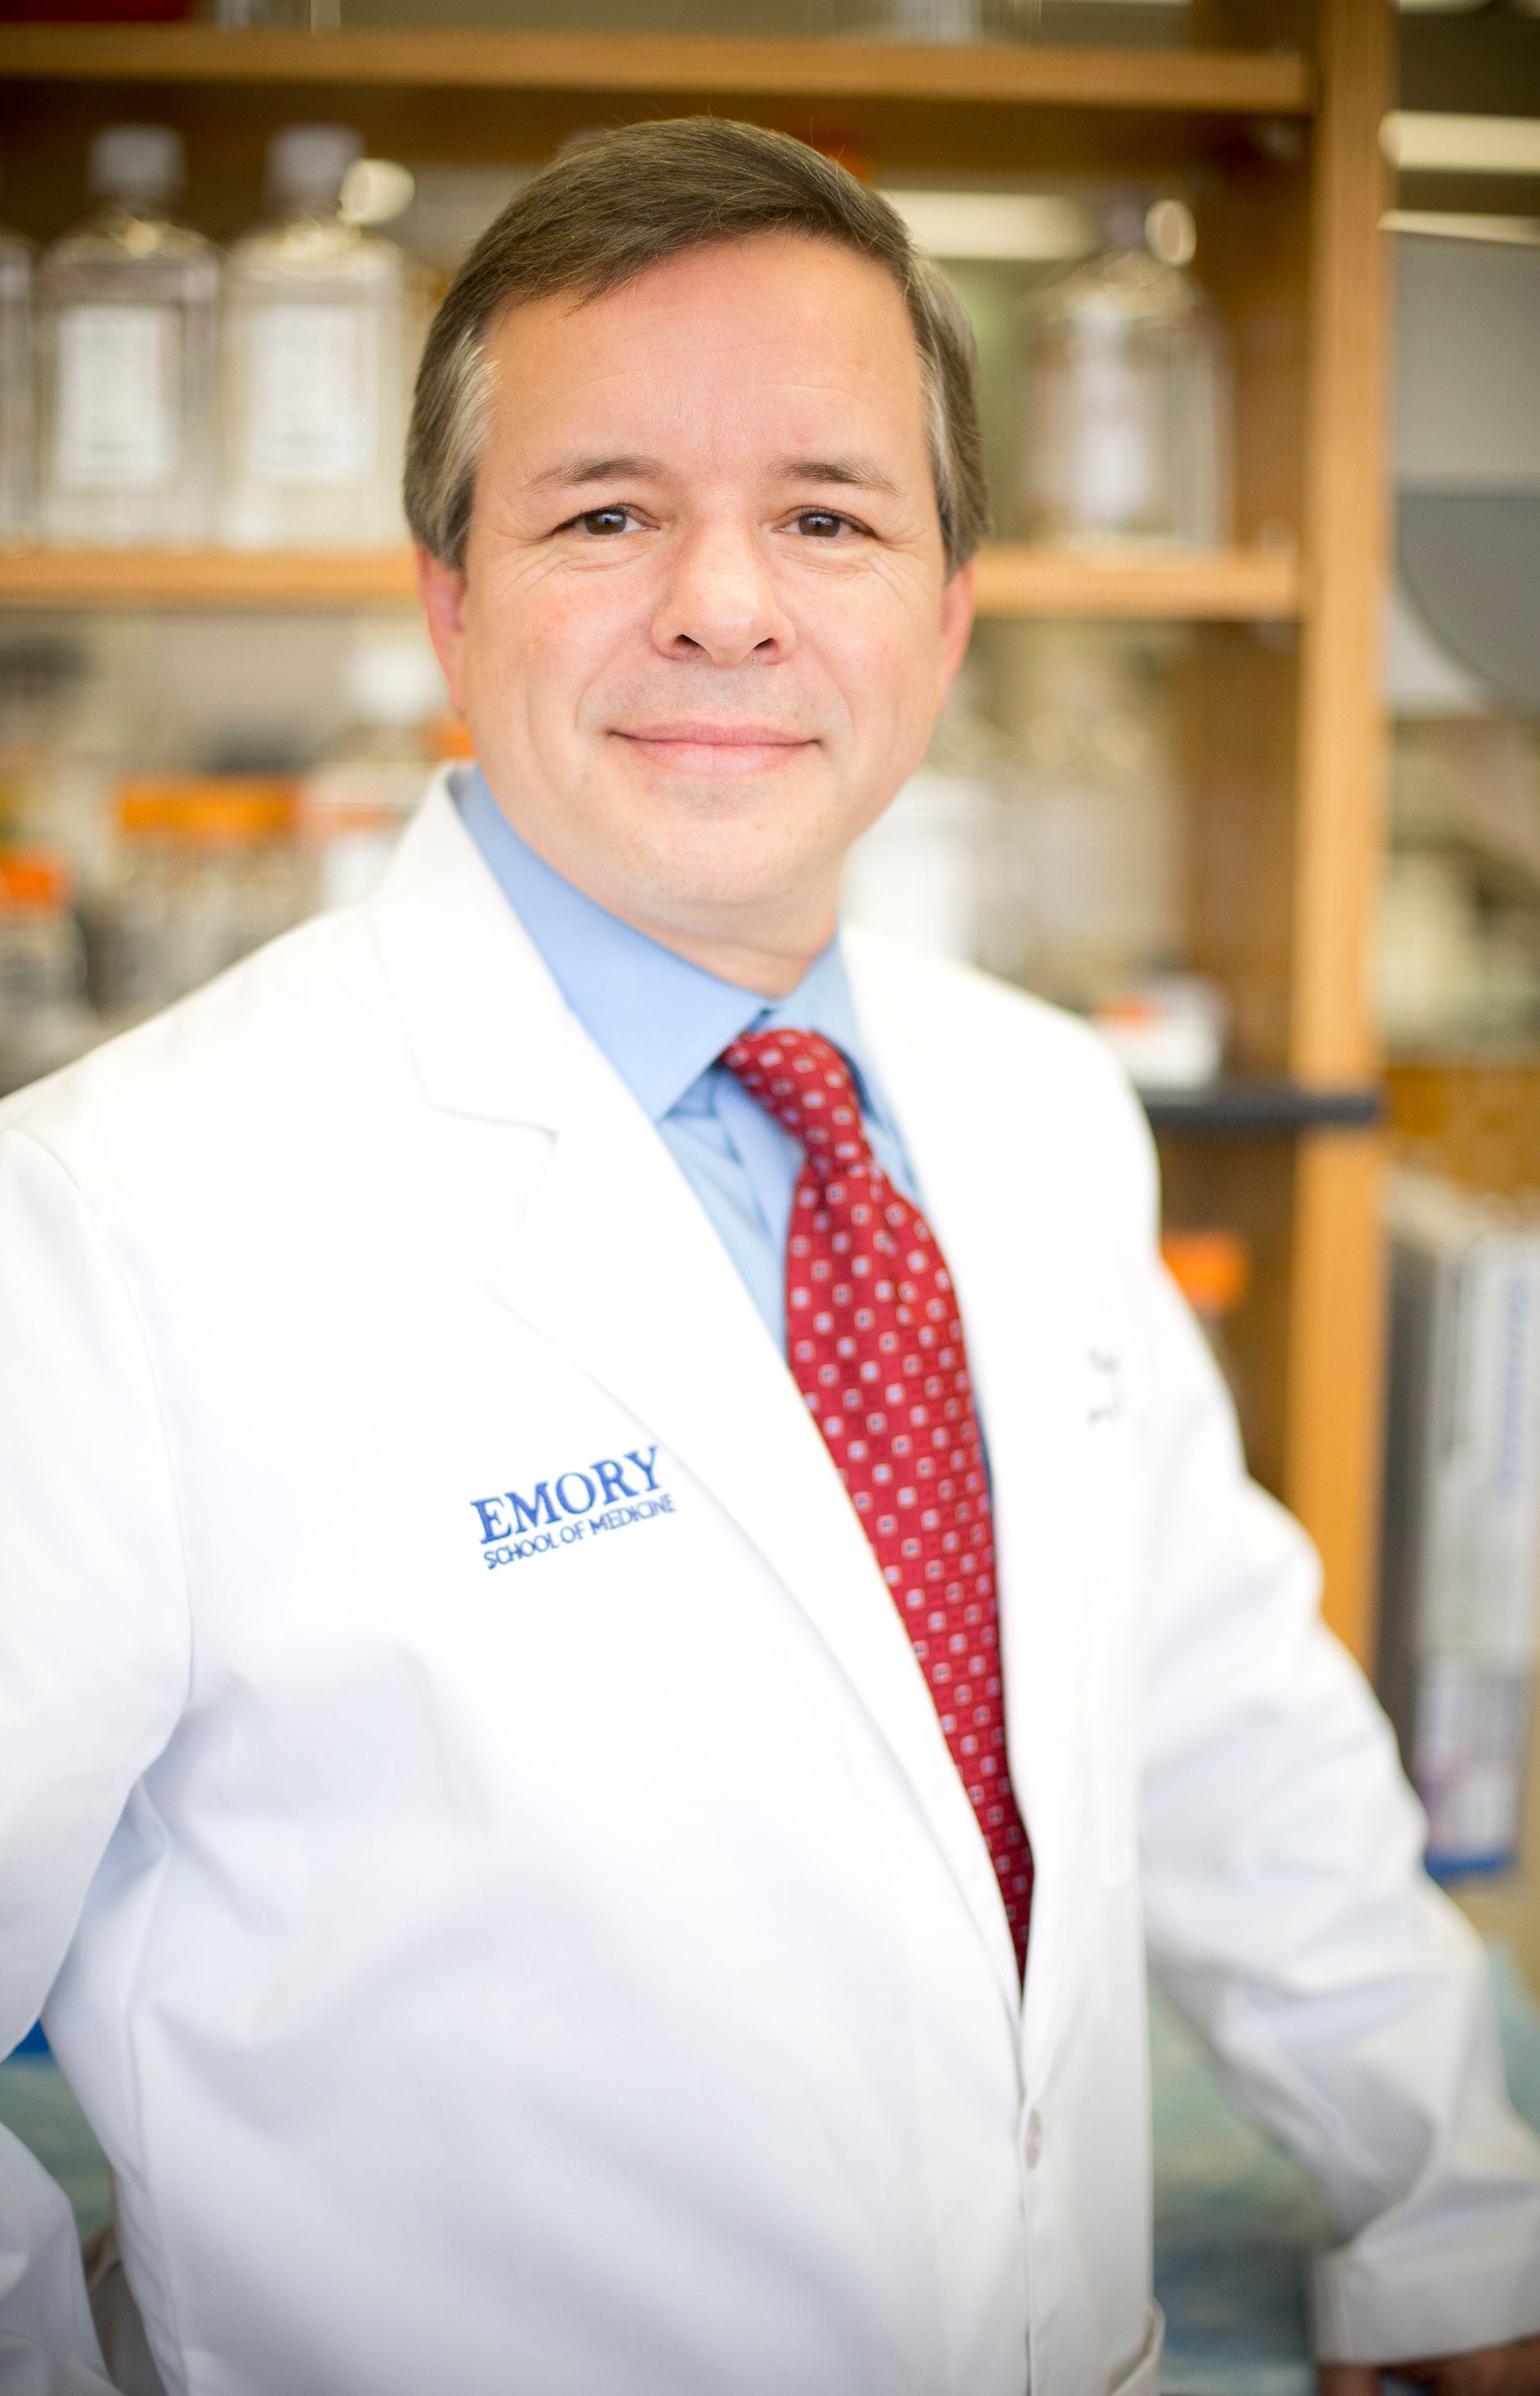 Emory emergency medicine physician David Wright sits in his lab.